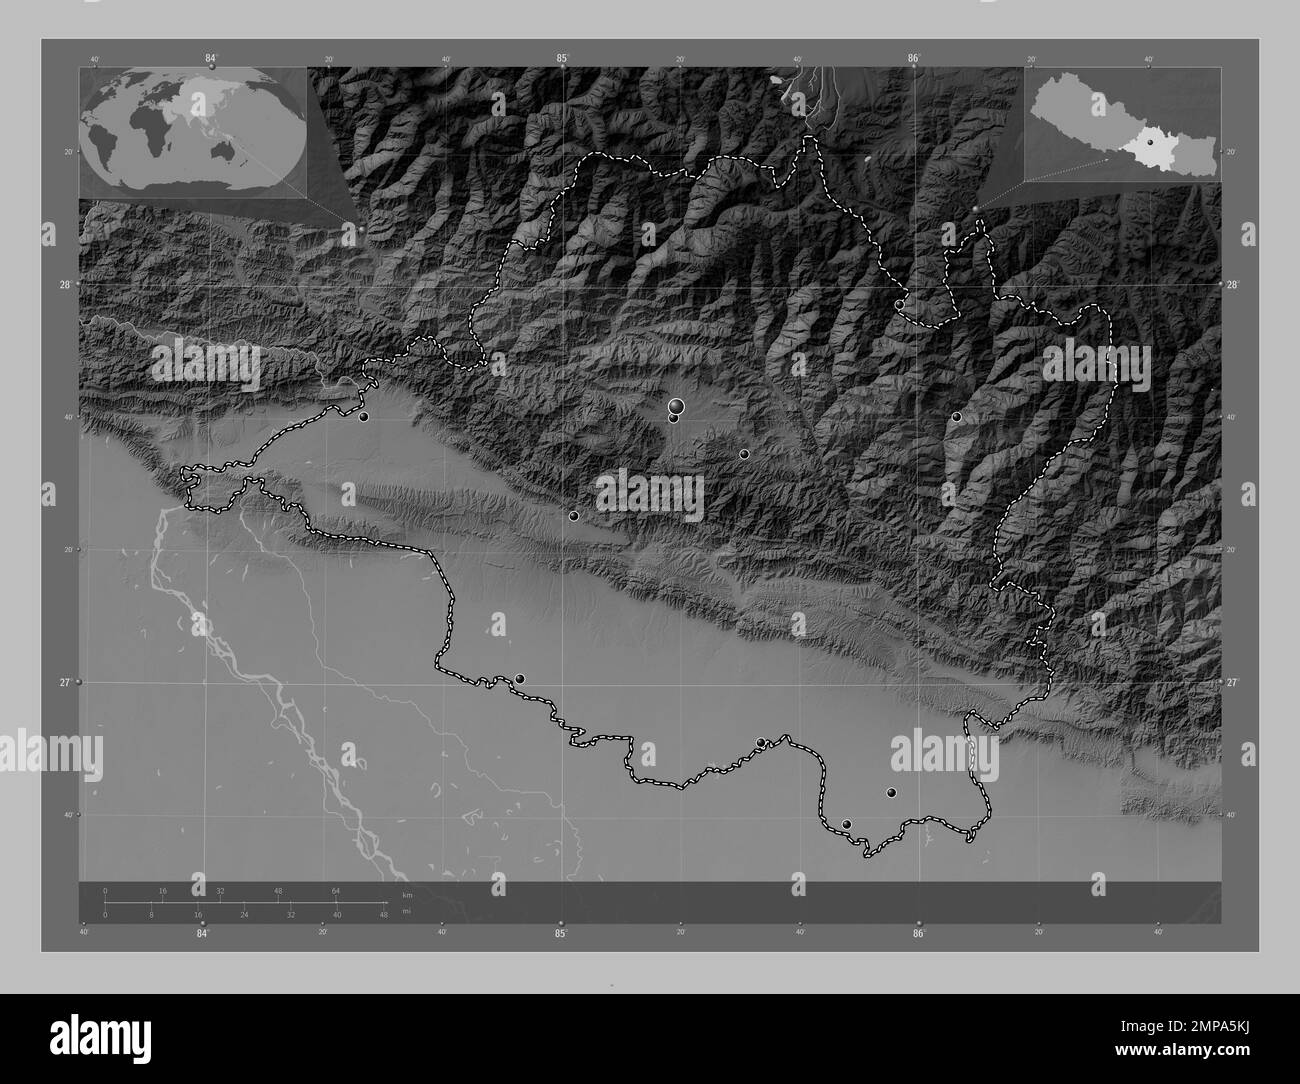 Central, development region of Nepal. Grayscale elevation map with lakes and rivers. Locations of major cities of the region. Corner auxiliary locatio Stock Photo